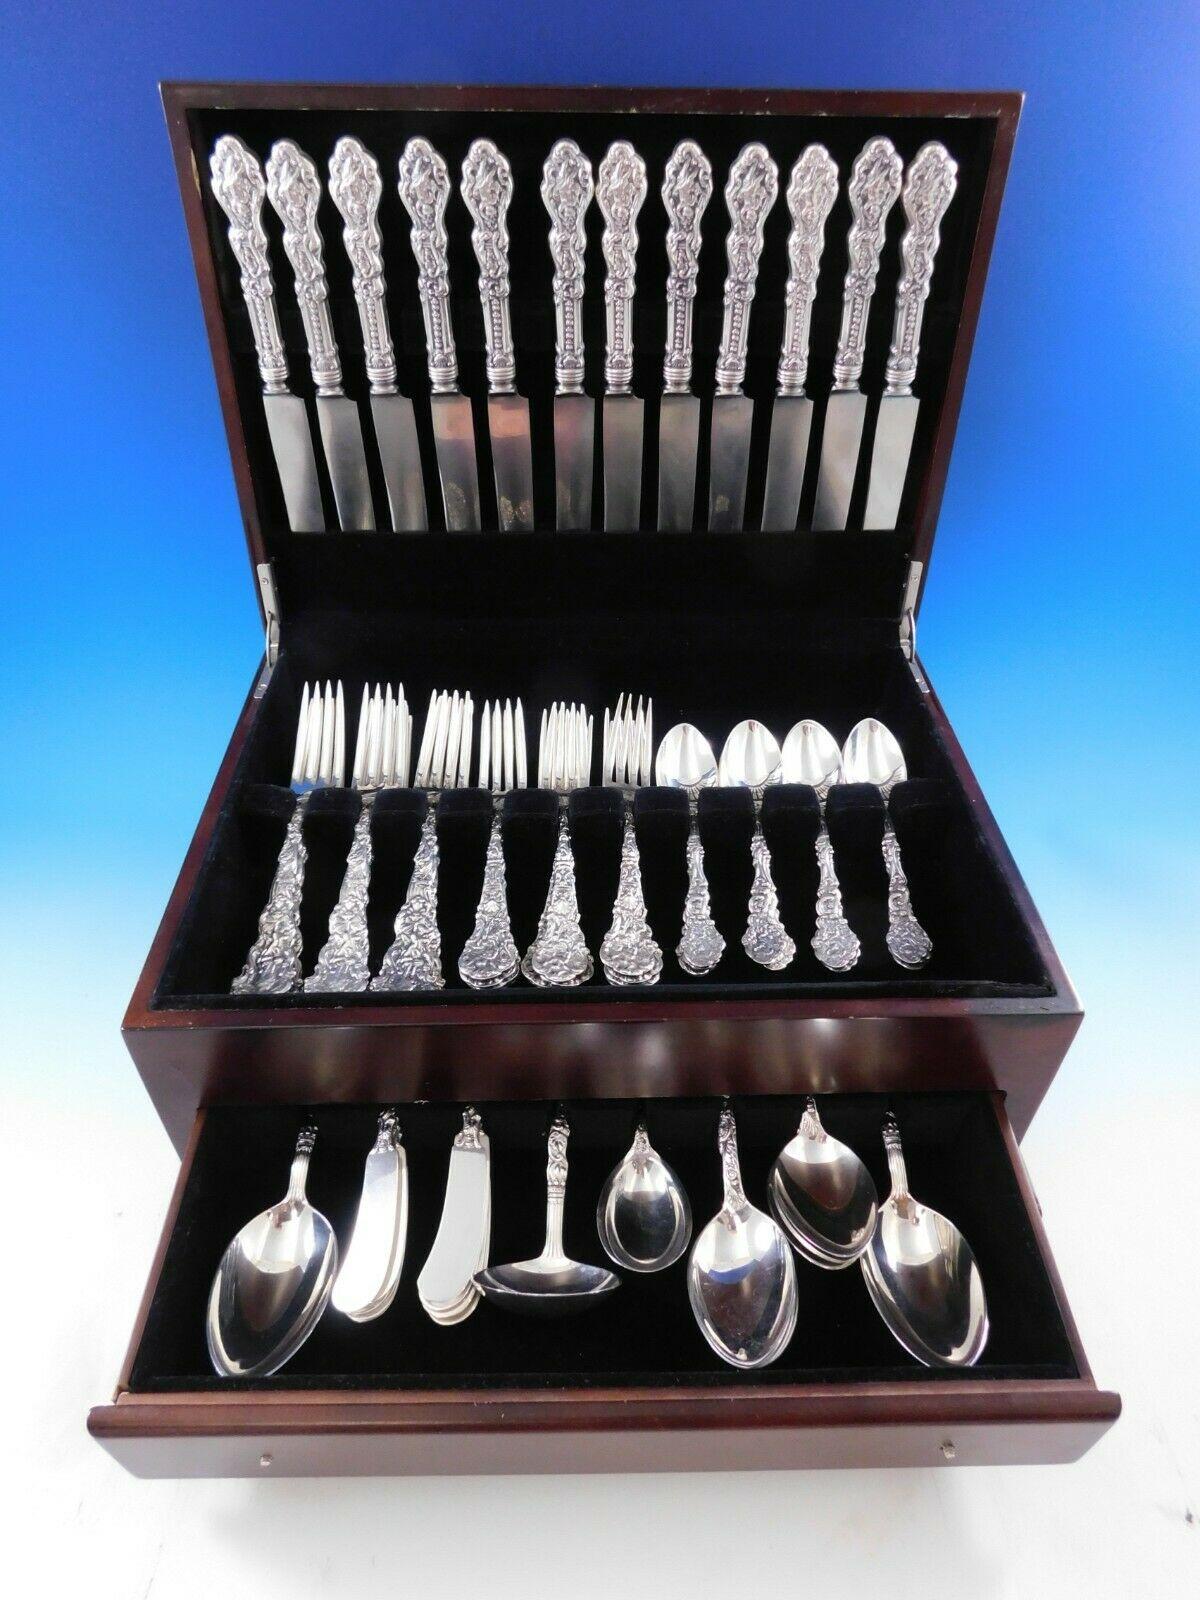 Superb dinner size multi-motif Versailles by Gorham sterling silver flatware set - 76 pieces. This set includes: 

12 dinner size knives, 9 3/4